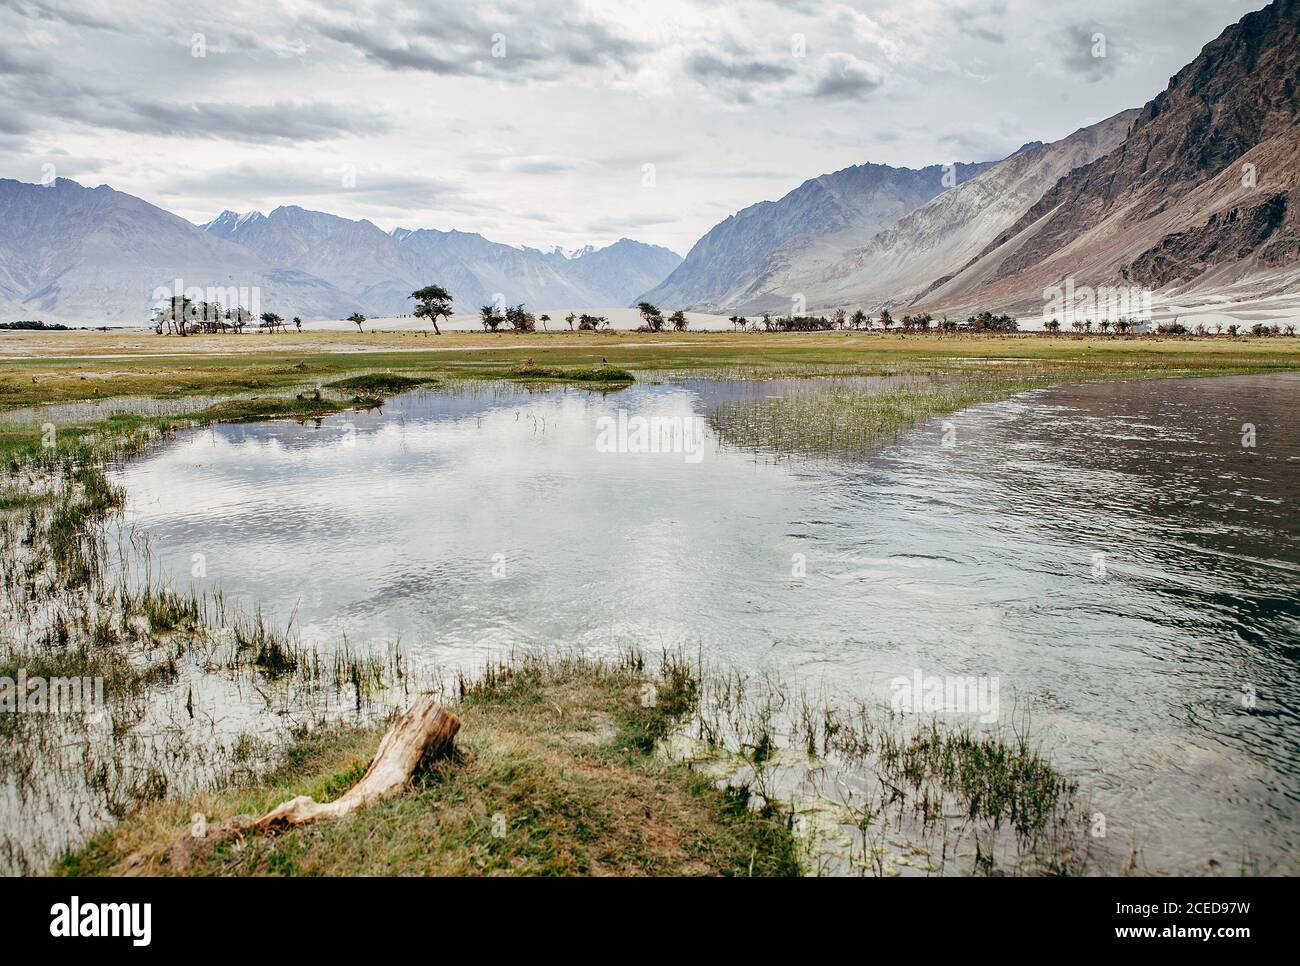 Public domain image of Hunder, Nubra Valley - PICRYL - Public Domain Media  Search Engine Public Domain Search